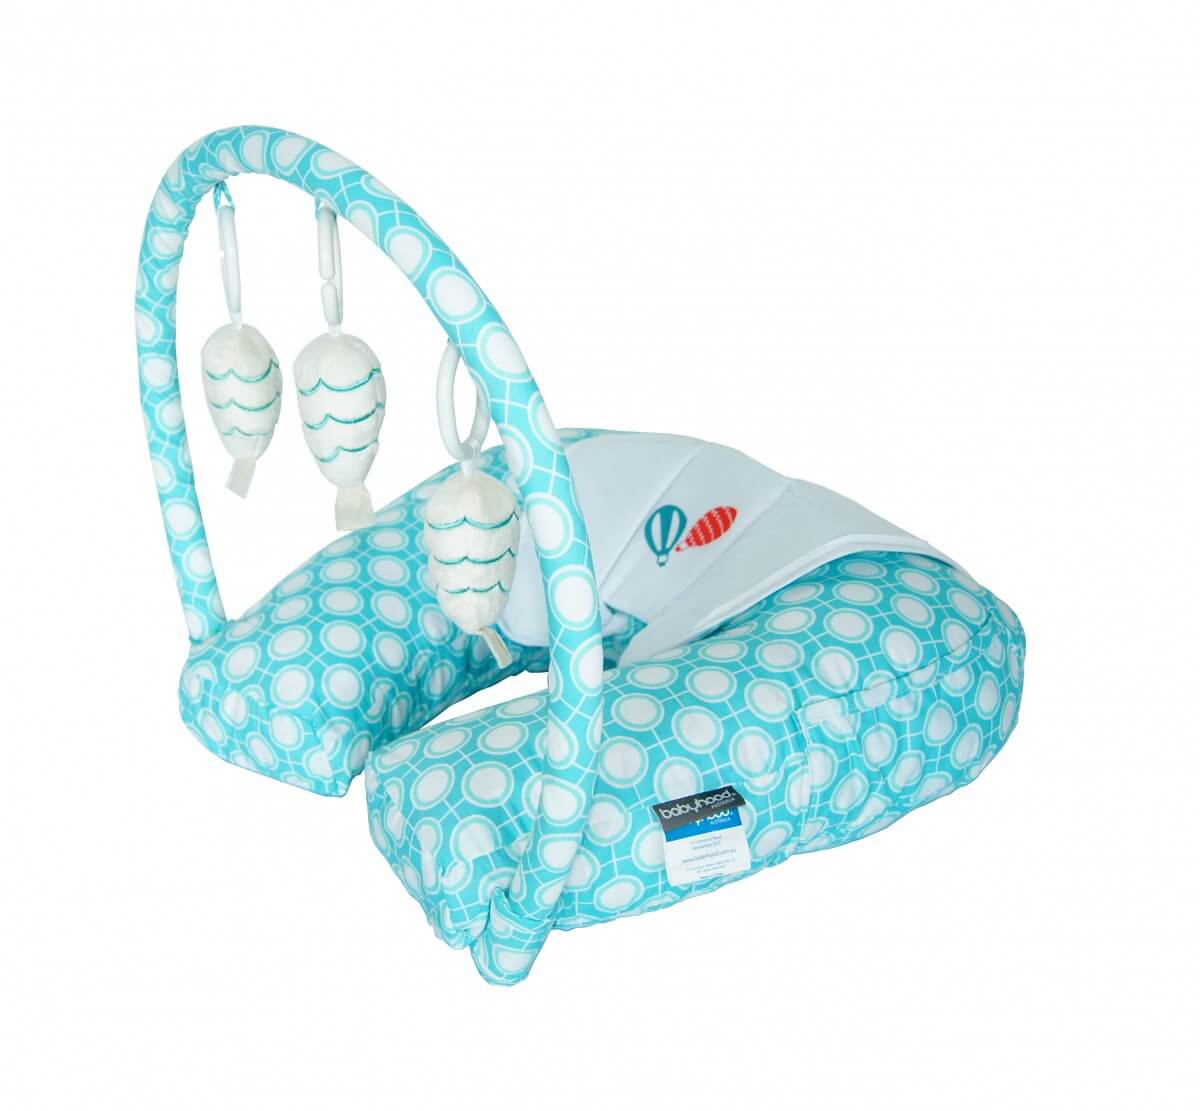 Babyhood 4 in 1 Nursing Pillow with Toy Bar - Turquoise Circles